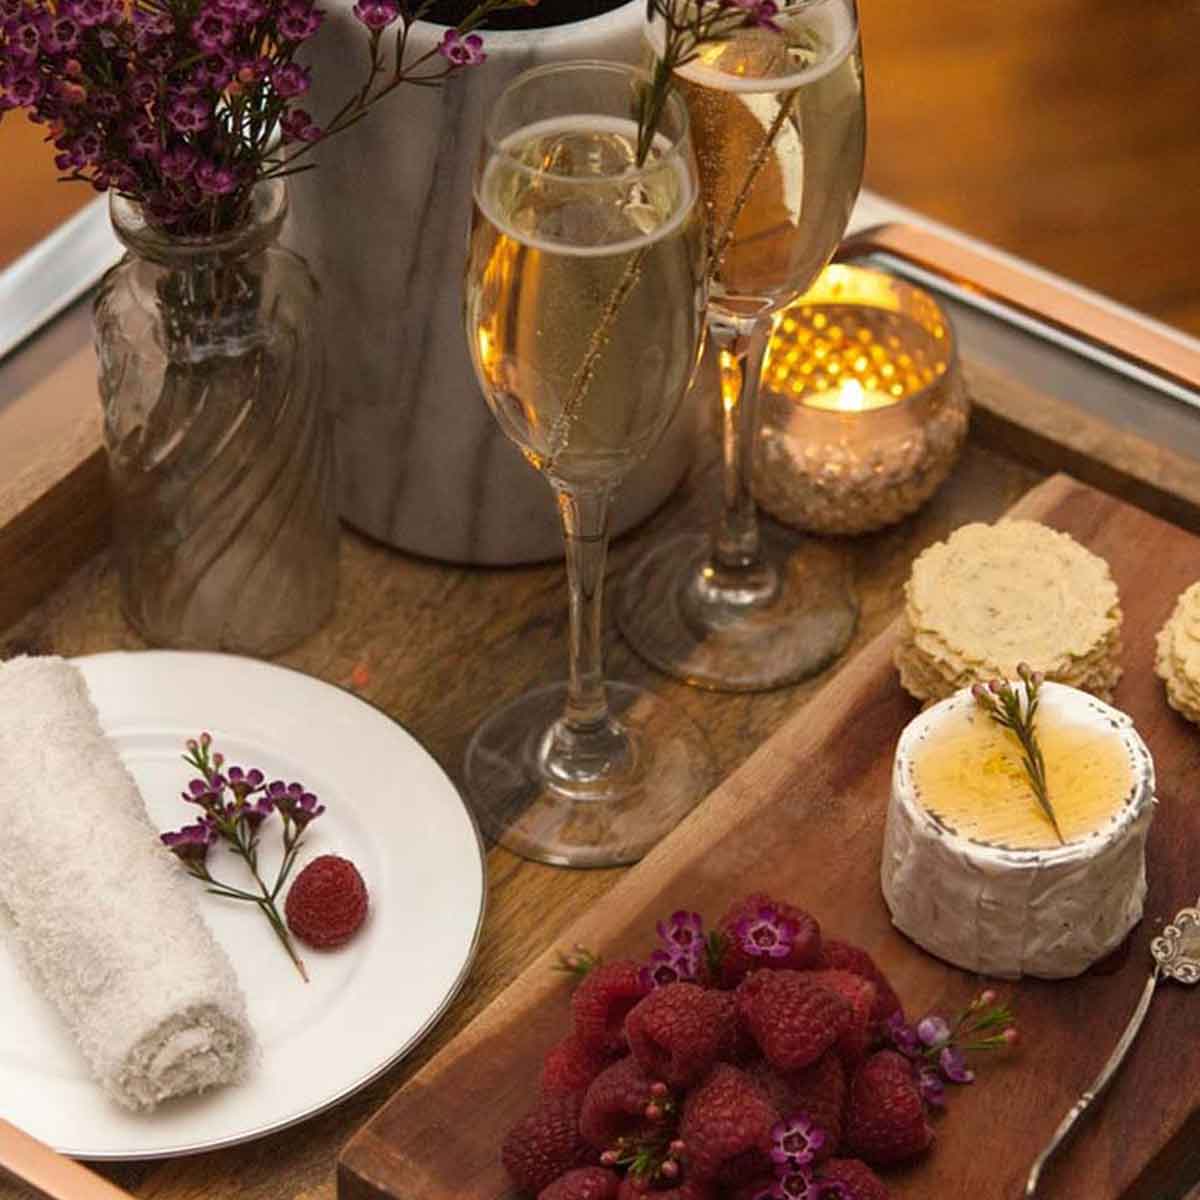 A wooden tray holding 2 champagne glasses with an assortment of cheeses, berries, crackers and flowers.